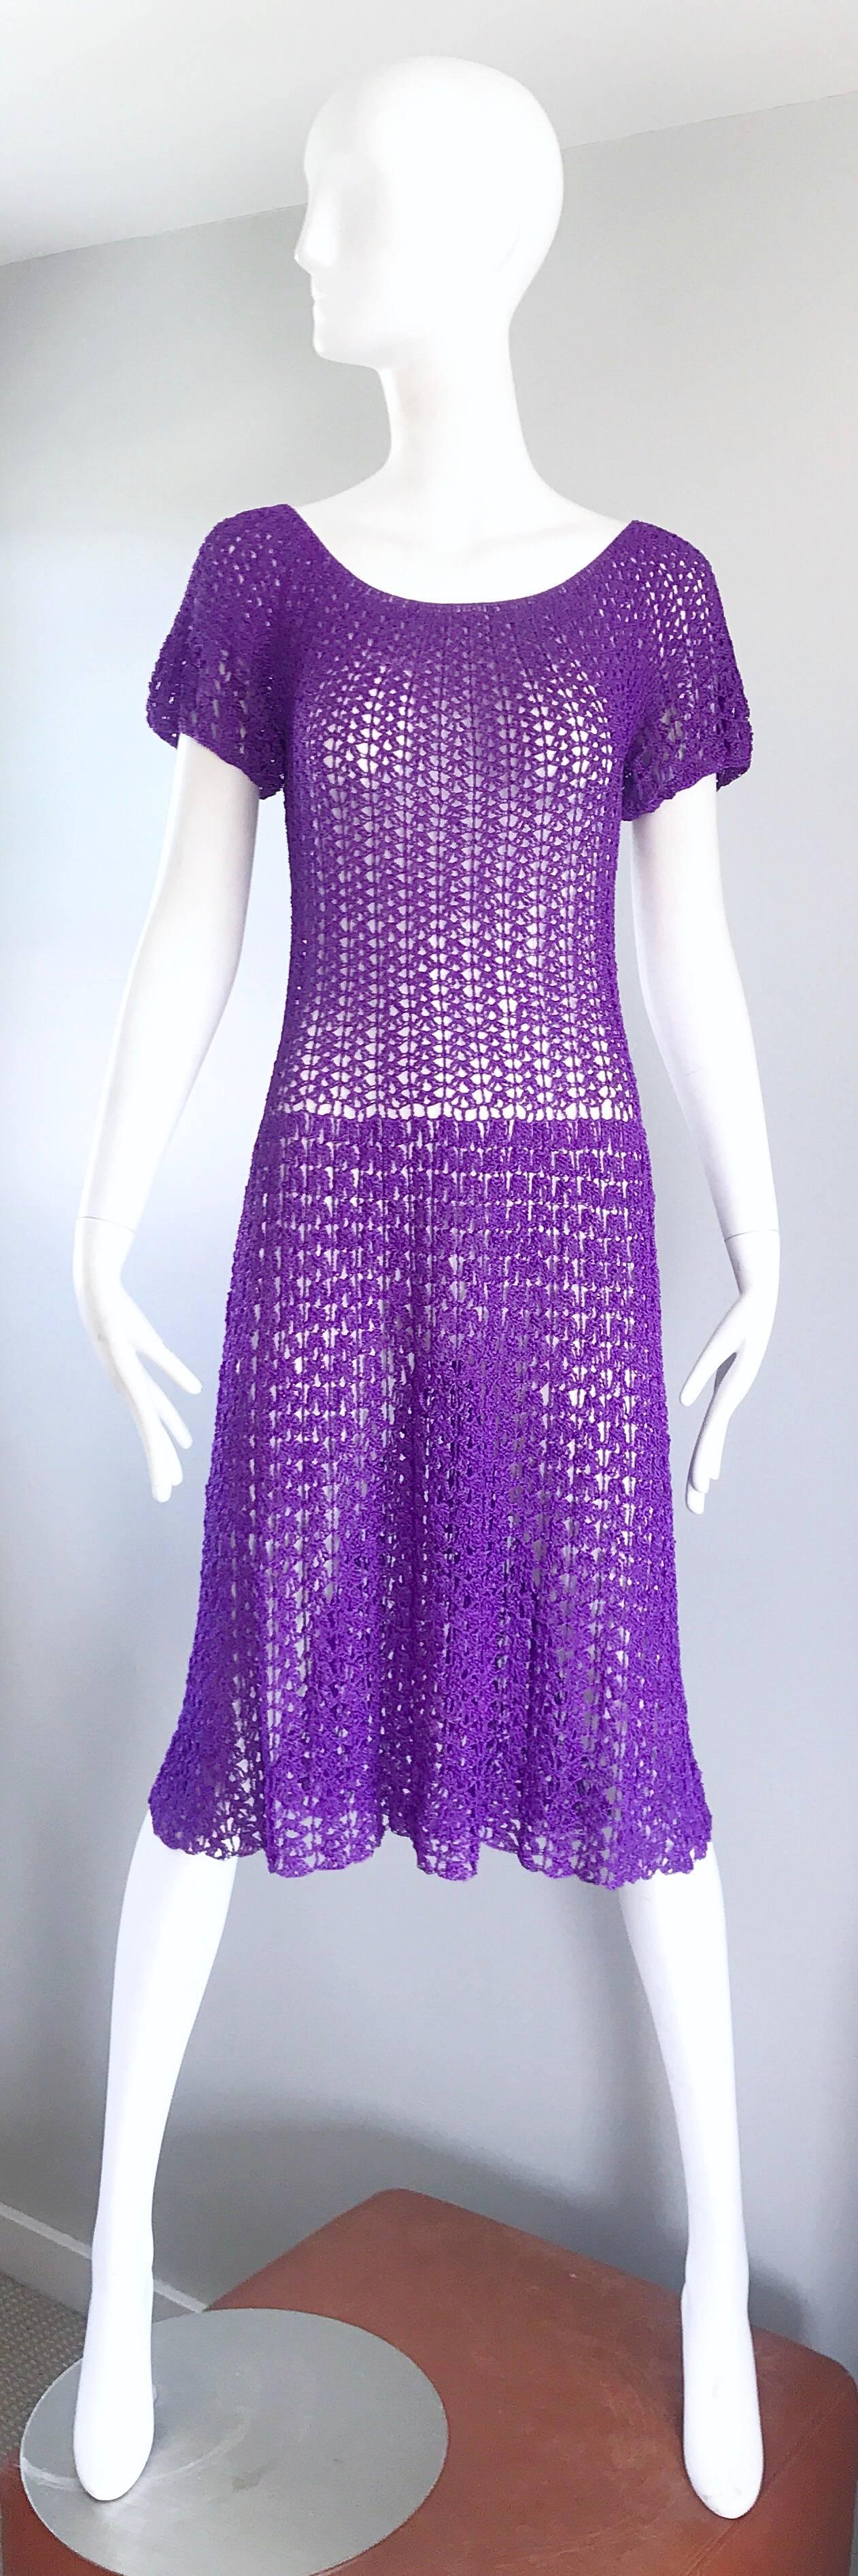 Absolutely wonderful 1960s purple Italian rayon hand crochet knee length dress! The construction on this hard-to-find beauty is impeccable! Completely sewn by hand, with an expert eye to detail. Definitely has an ode to the 1930s, as did a lot of